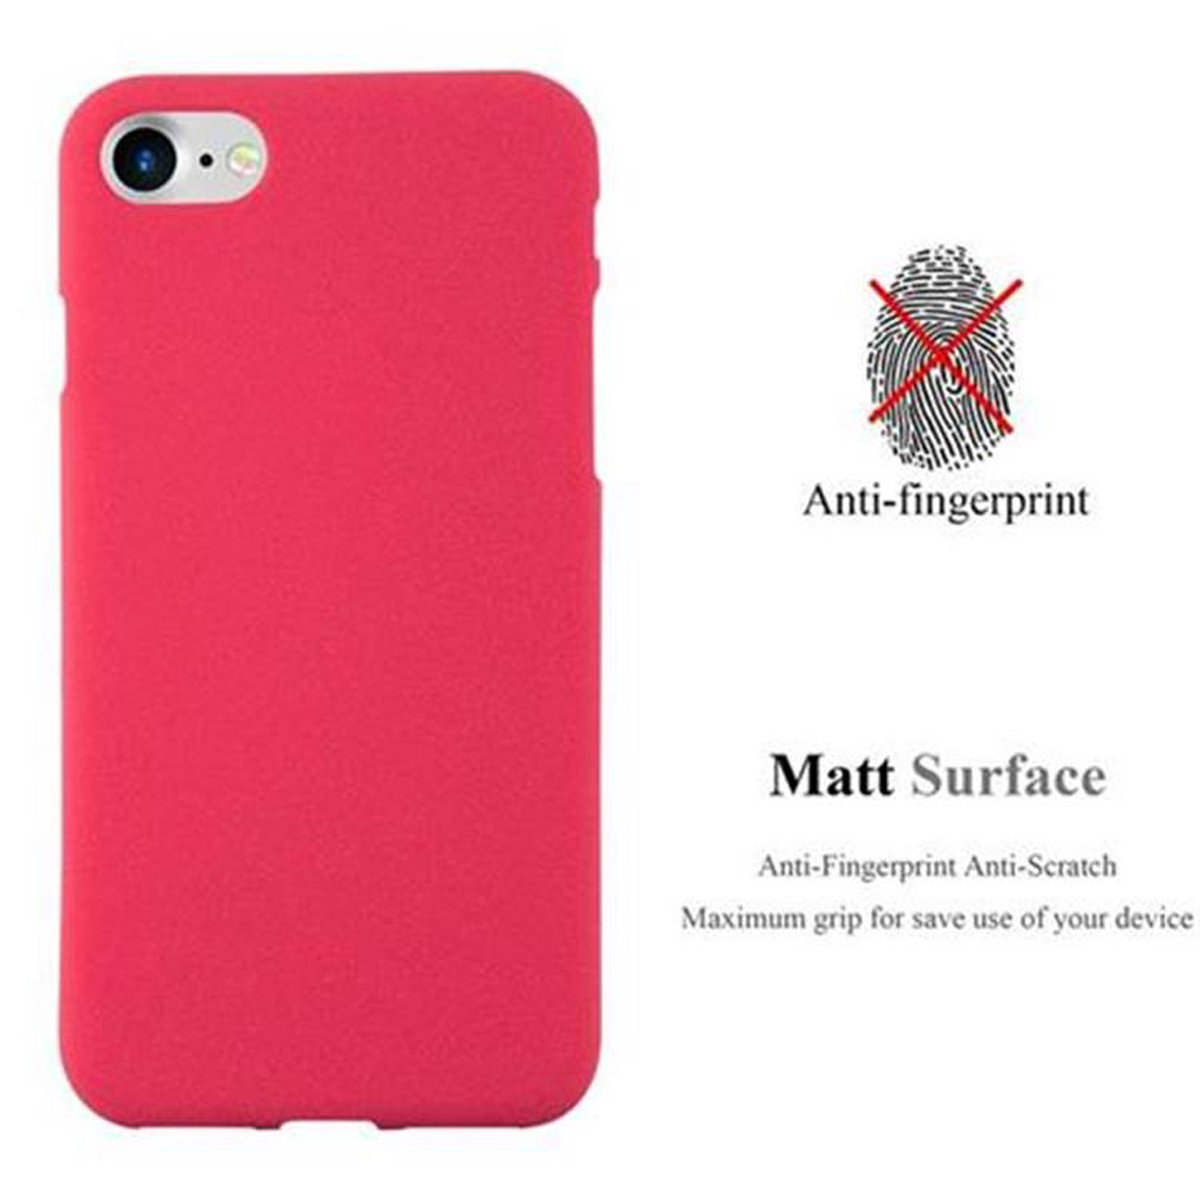 / / Apple, 7 CADORABO / Backcover, FROST 7S SE 8 Frosted iPhone ROT 2020, Schutzhülle, TPU